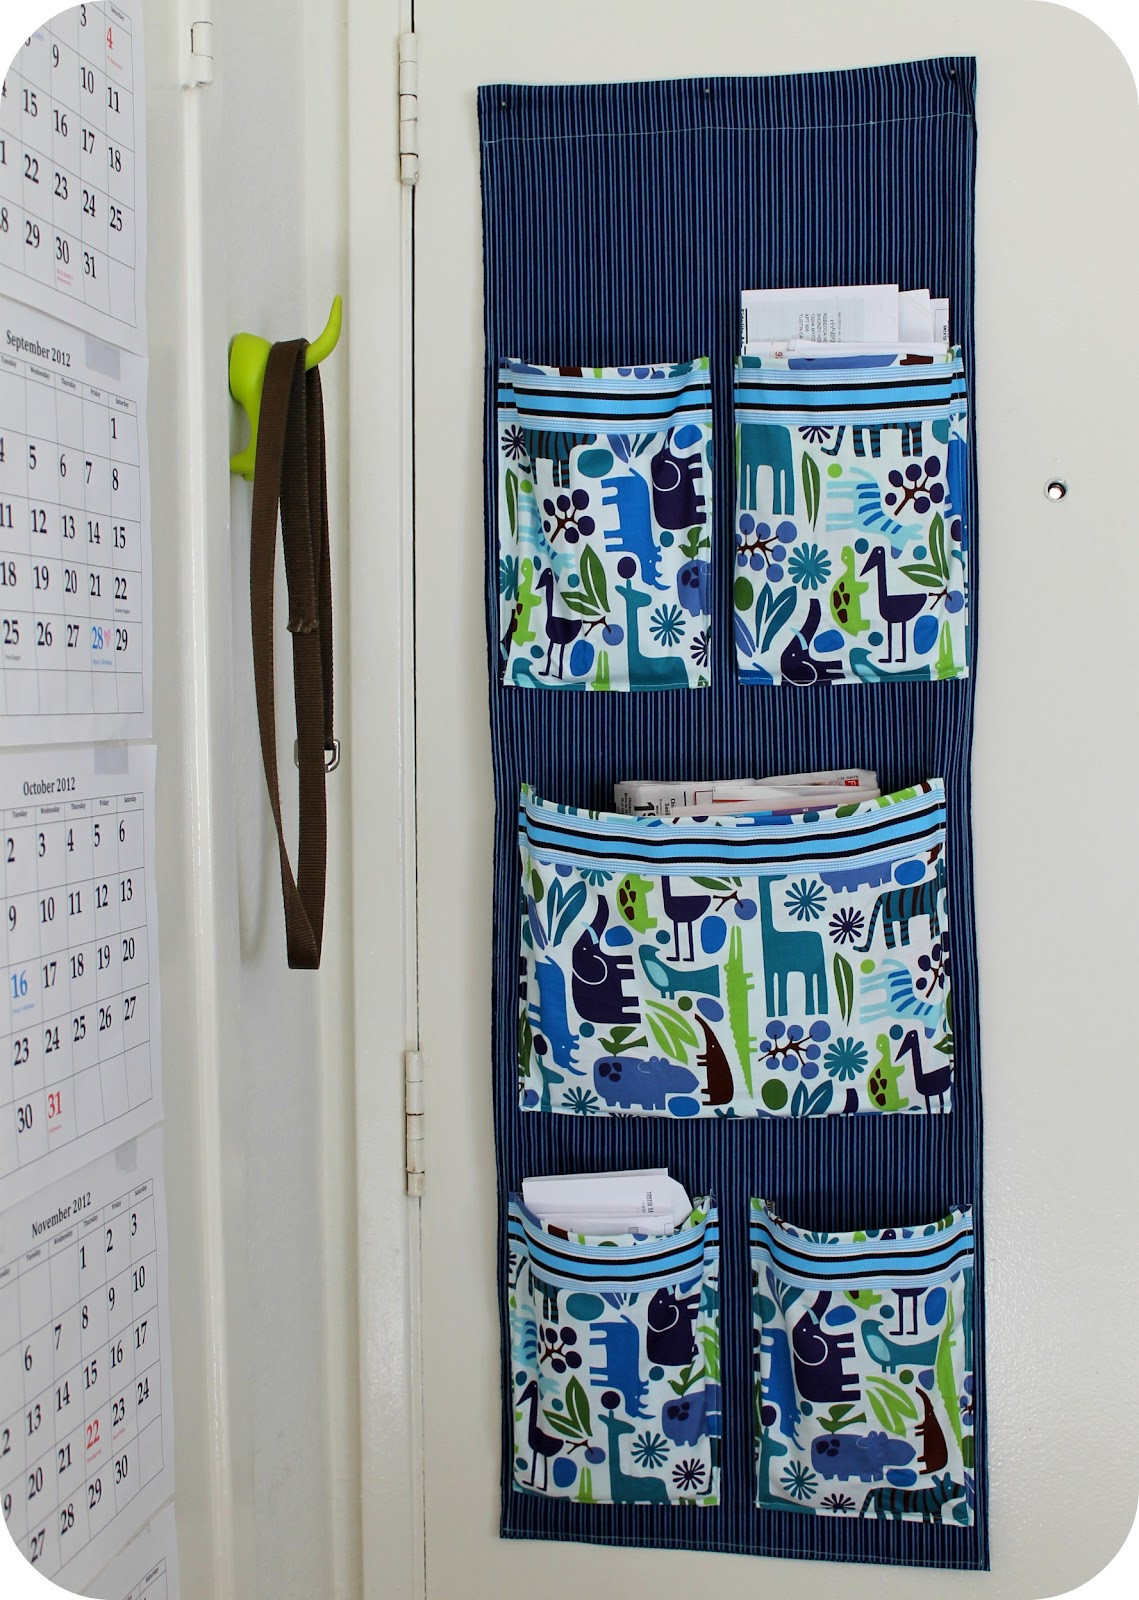 DIY Letter Organizer
 DiY Project Sew a Fabric Mail Organizer for the Wall